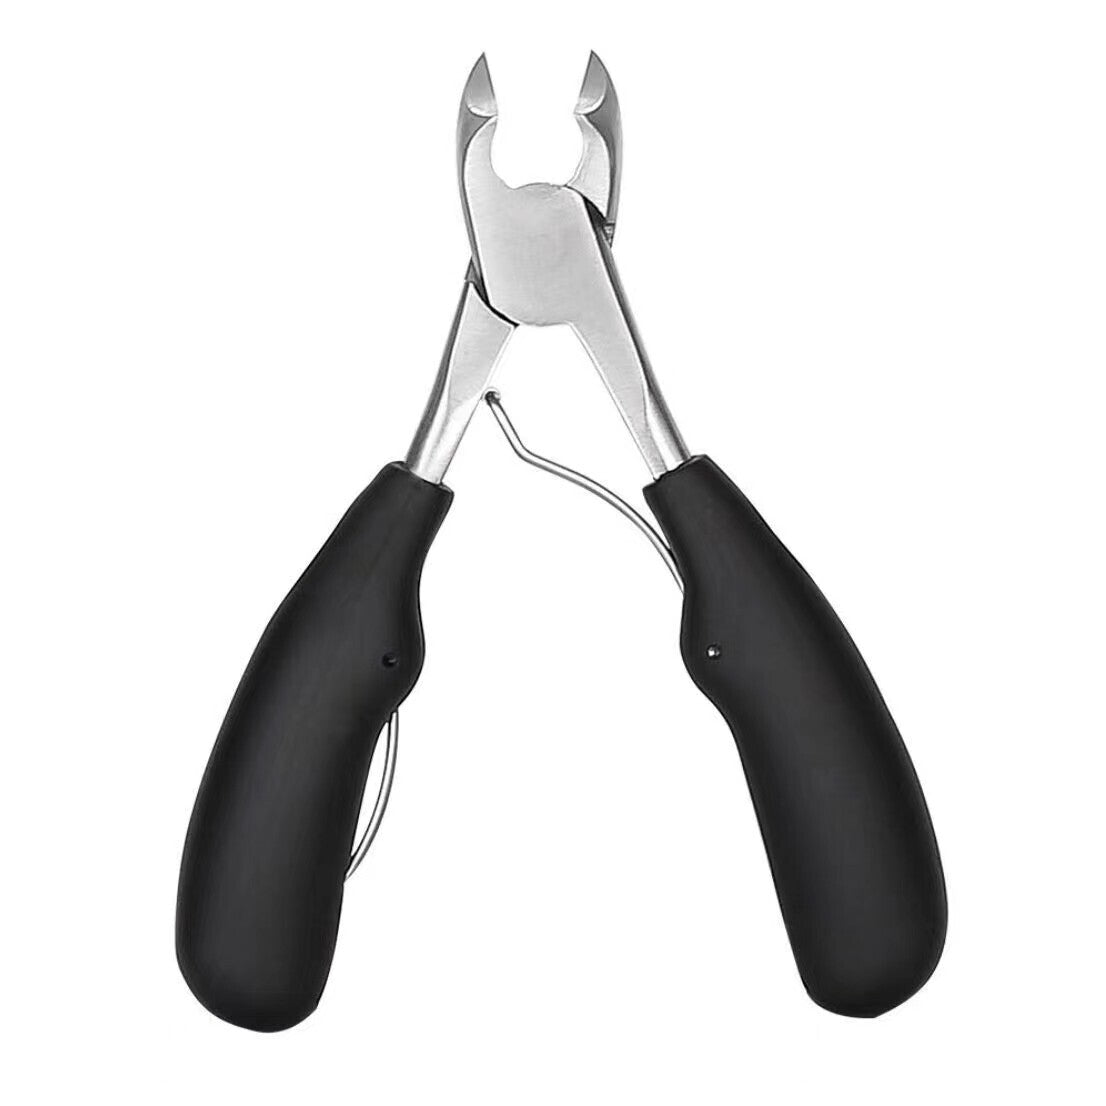 Stainless Steel Nail Cutter Hawk Mouth Pliers